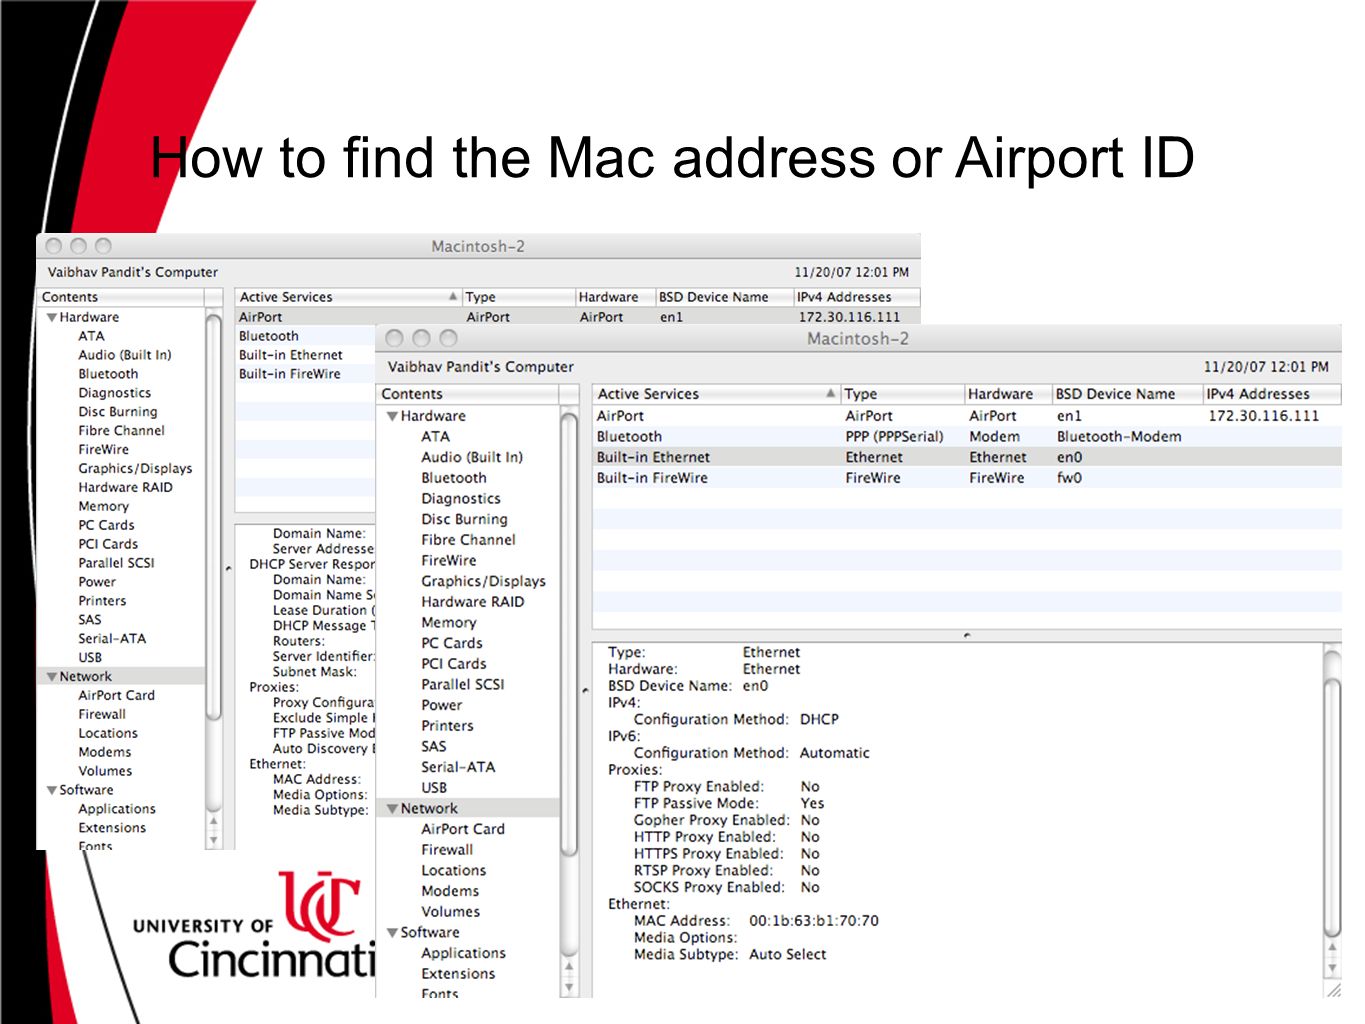 How to find the Mac address or Airport ID